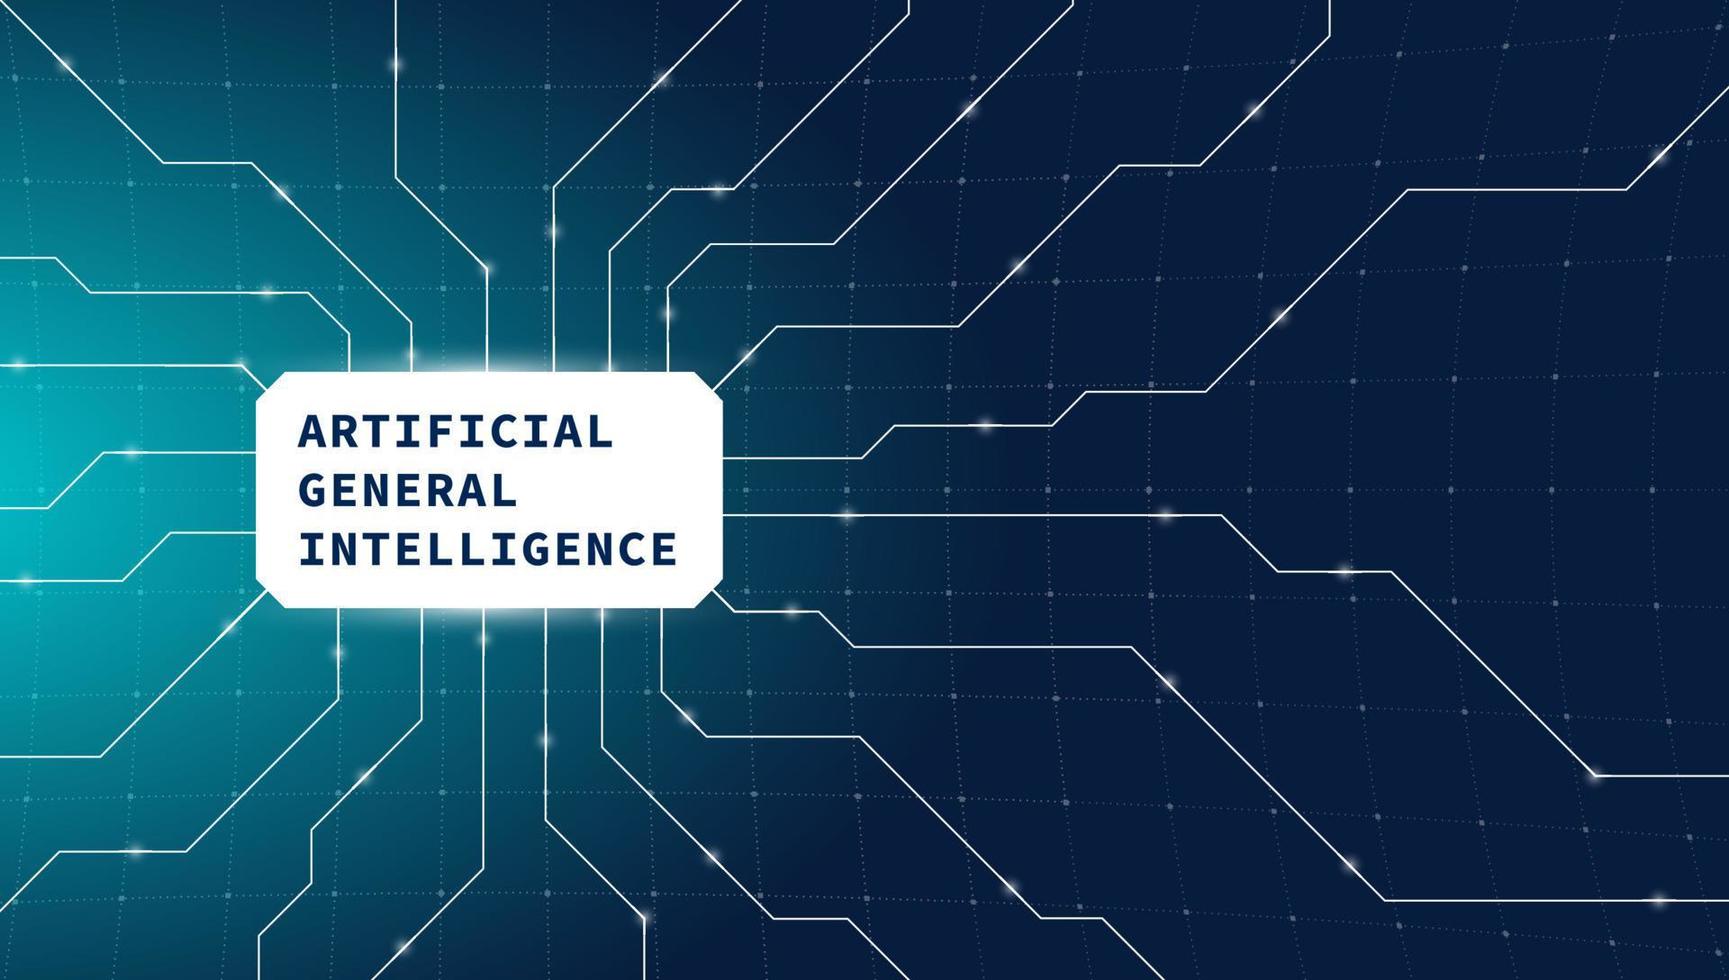 Modern banner design Artificial General Intelligence. AI-powered chatbot utilizing OpenAI AGI and GPT technology for seamless digital communication. Concept eps illustration vector